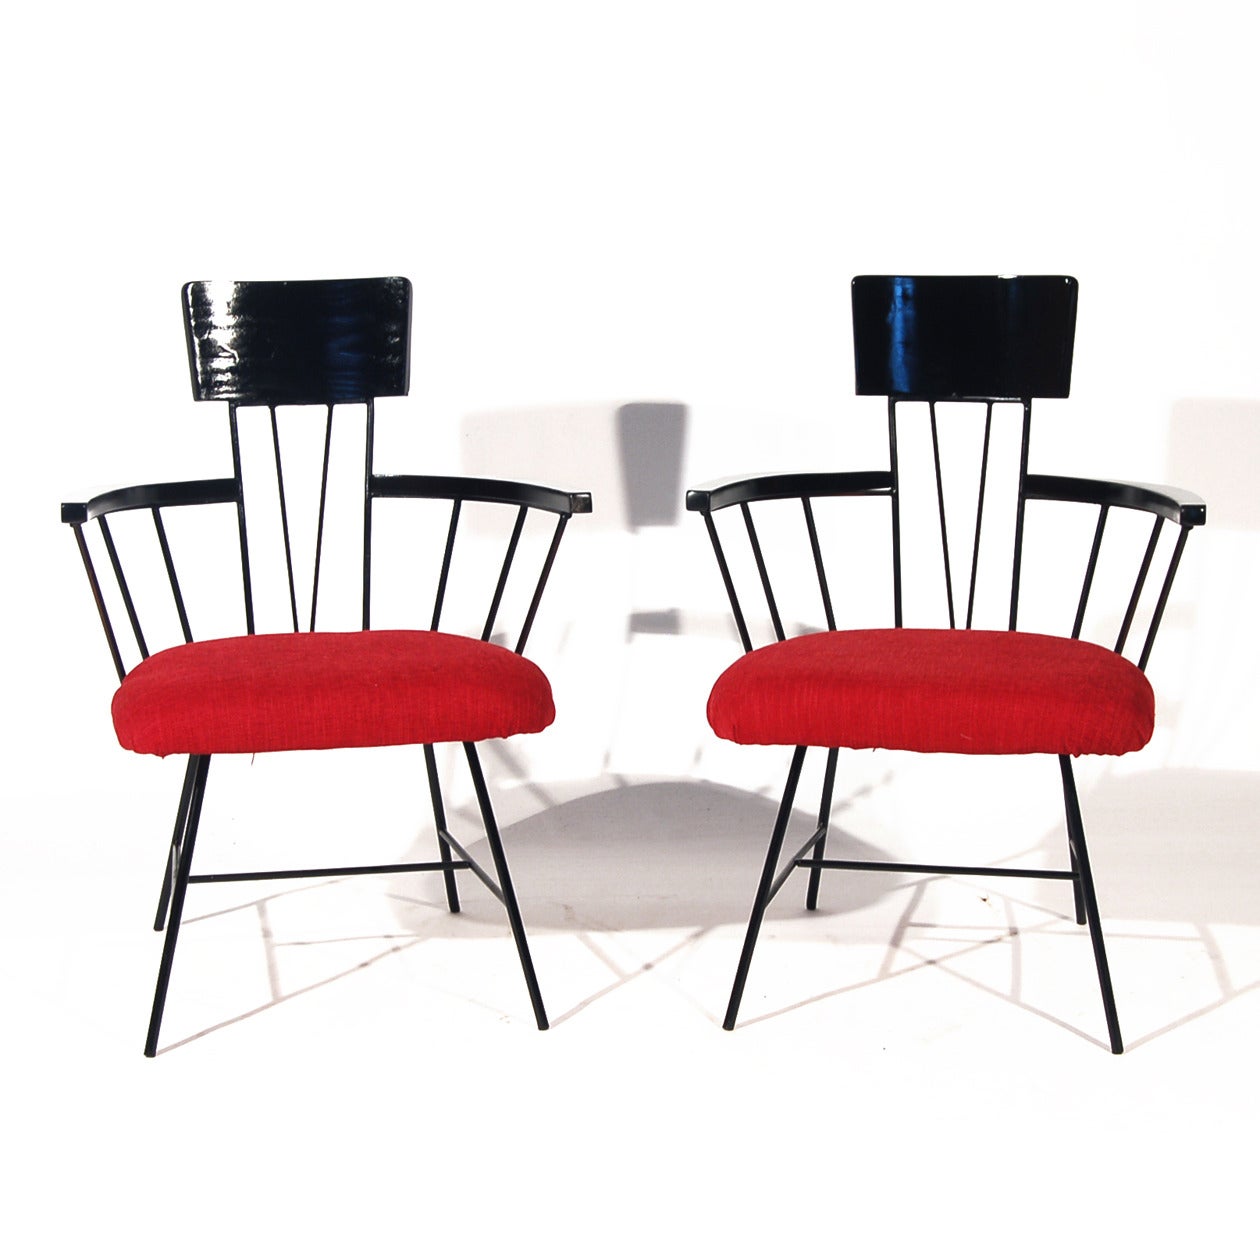 Striking pair of 1950's side or dining chairs by Richard McCarthy for Selrite.  Similar in style to Paul McCobb's Allegro chairs for Woodward but we think these have a little more flair. They have been restored, (re-envisioned), with a black lacquer